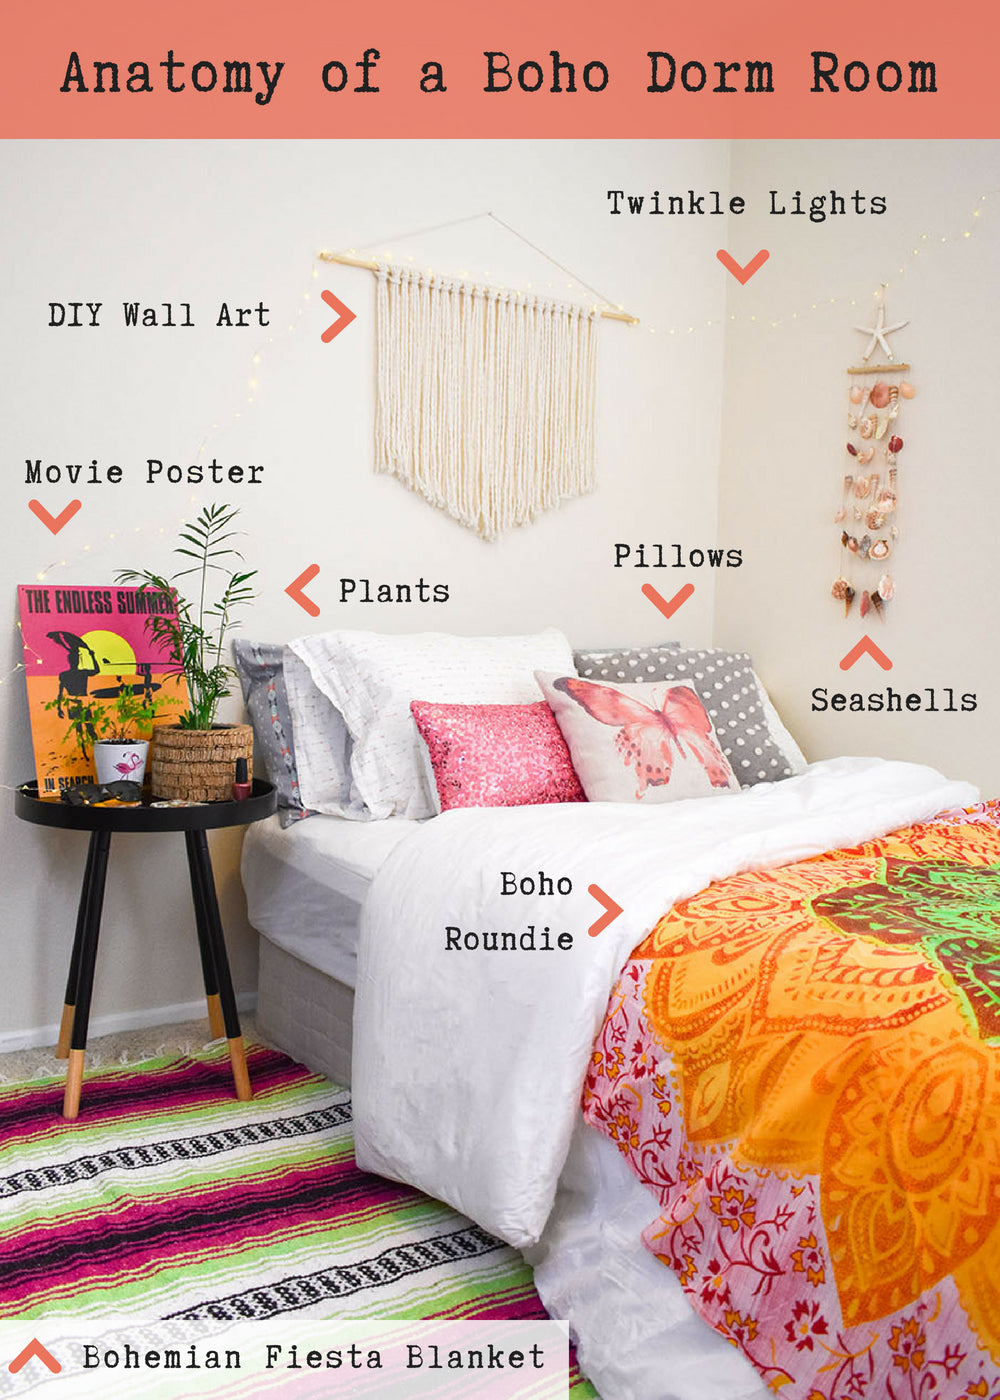 Breaking down the elements of the perfect boho bedroom. This simple, yet colorful dorm room look was created for the boho girl who loves pink, the beach, and a casual cool vibe. It is not over top and has just the right amount of embellishment to let her personality shine.